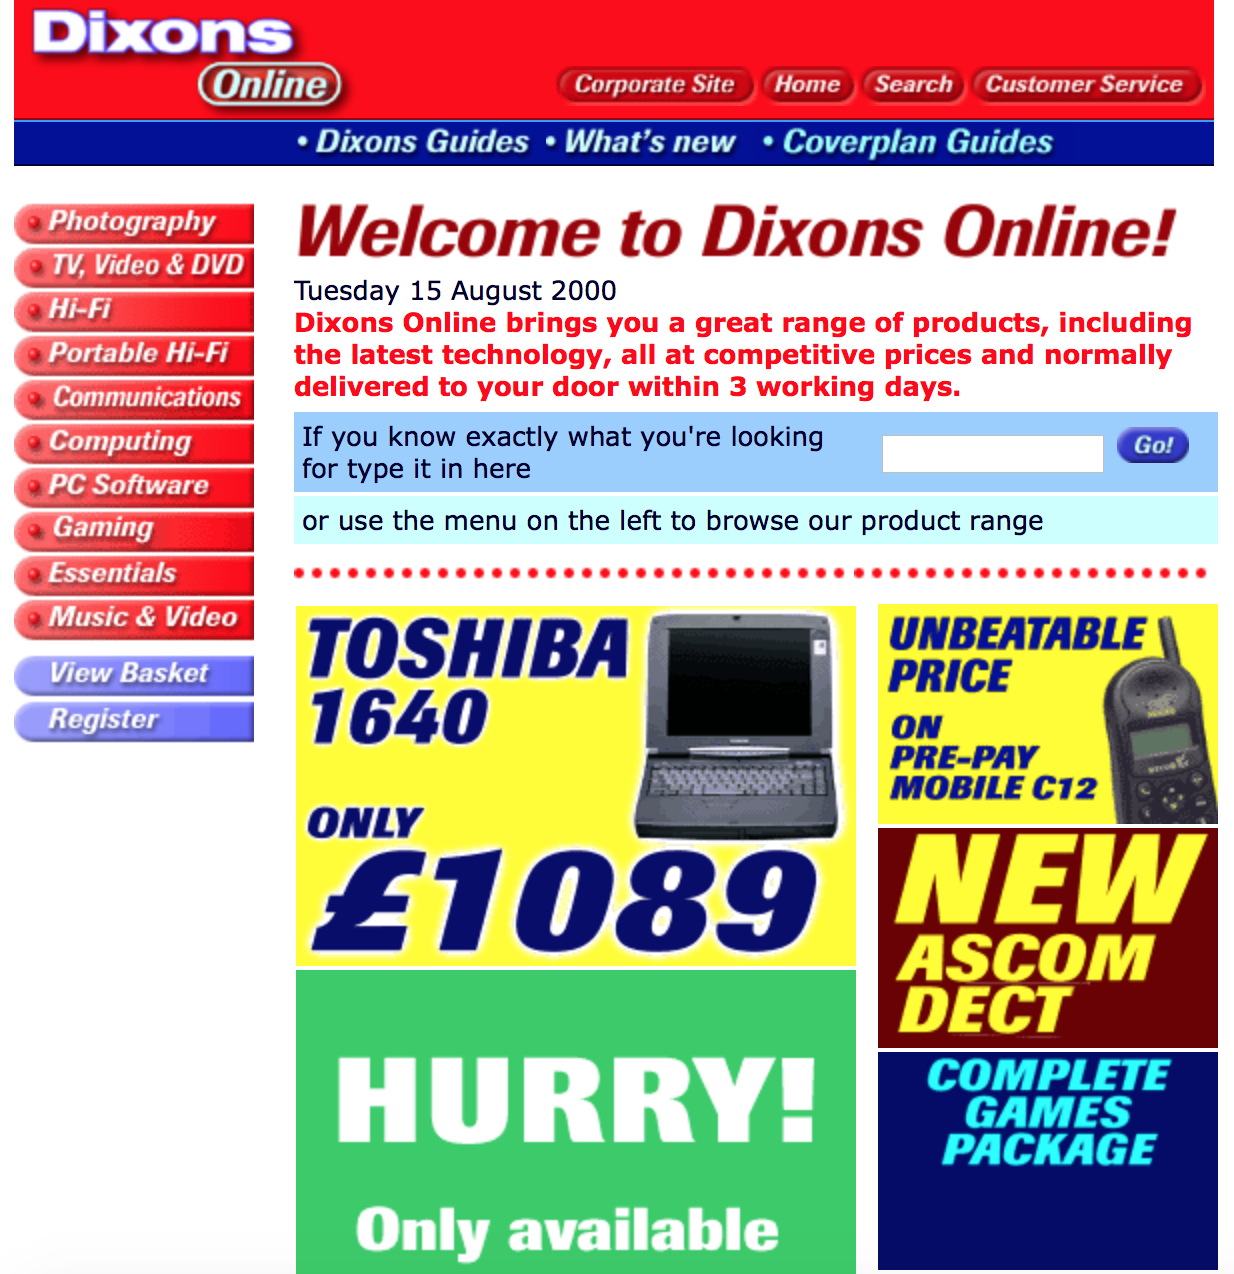 Let's all meet up in the year 2000: feeling nostalgic for websites of yesteryear?